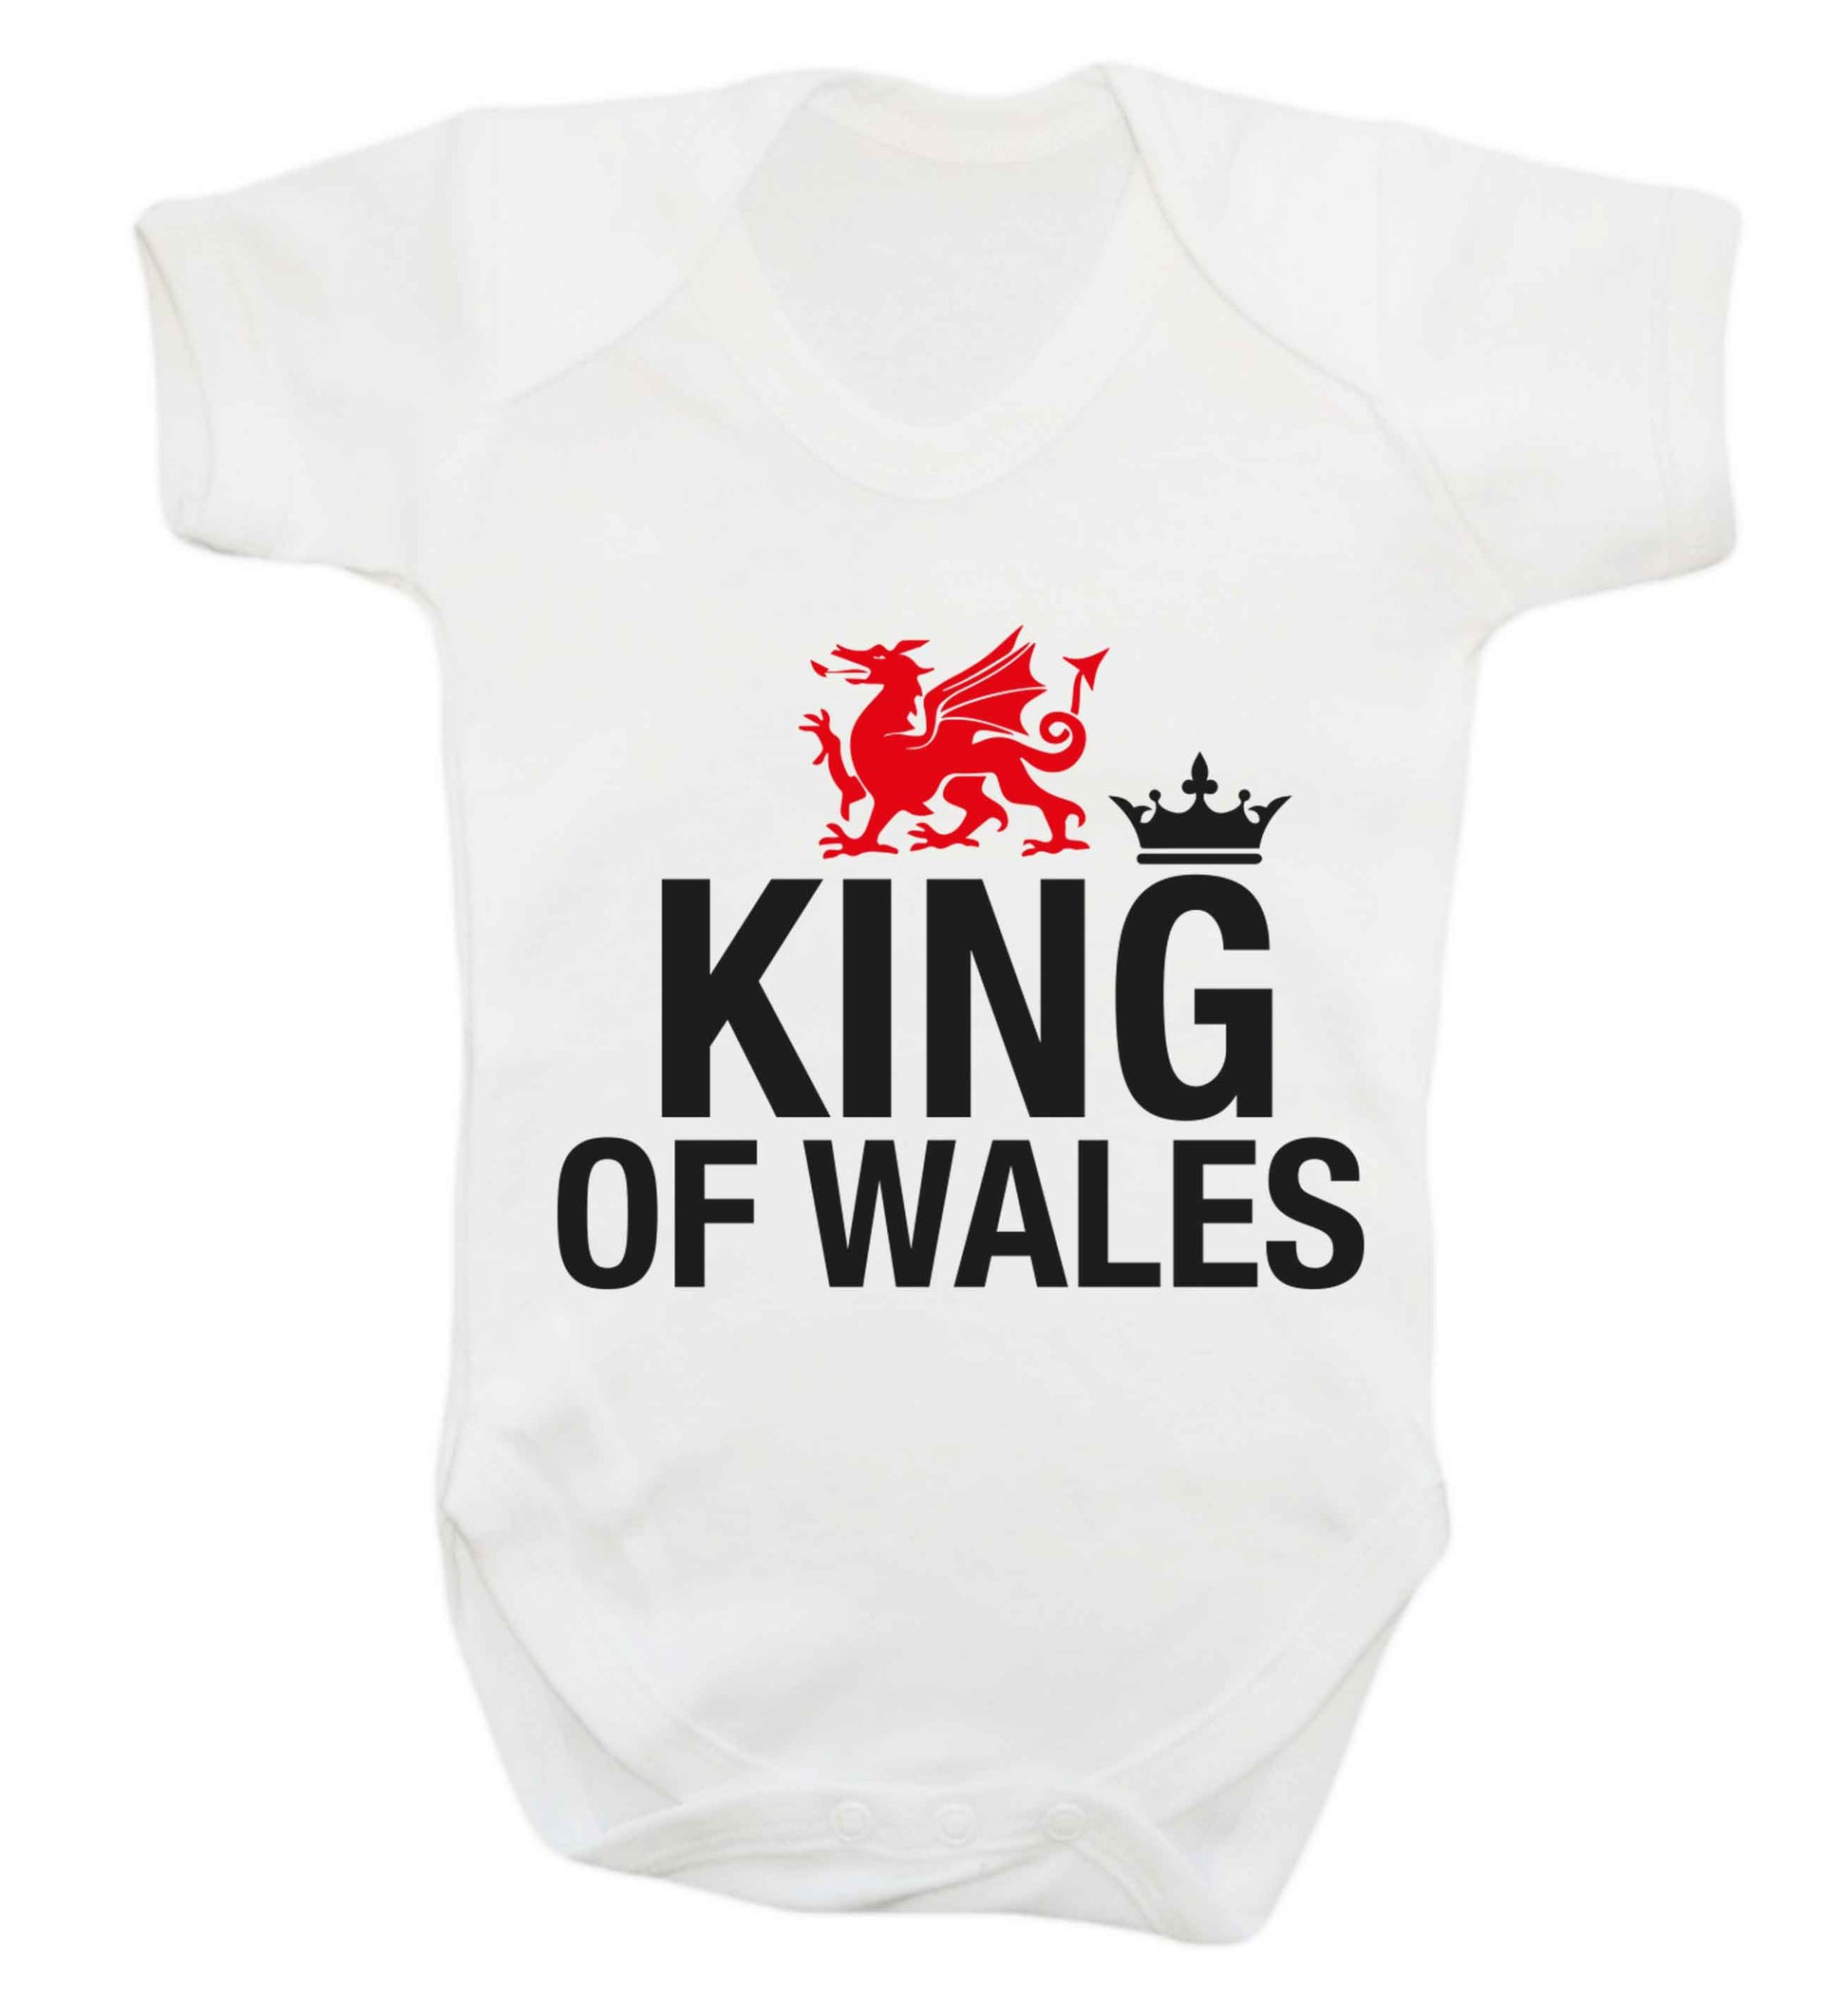 King of Wales Baby Vest white 18-24 months